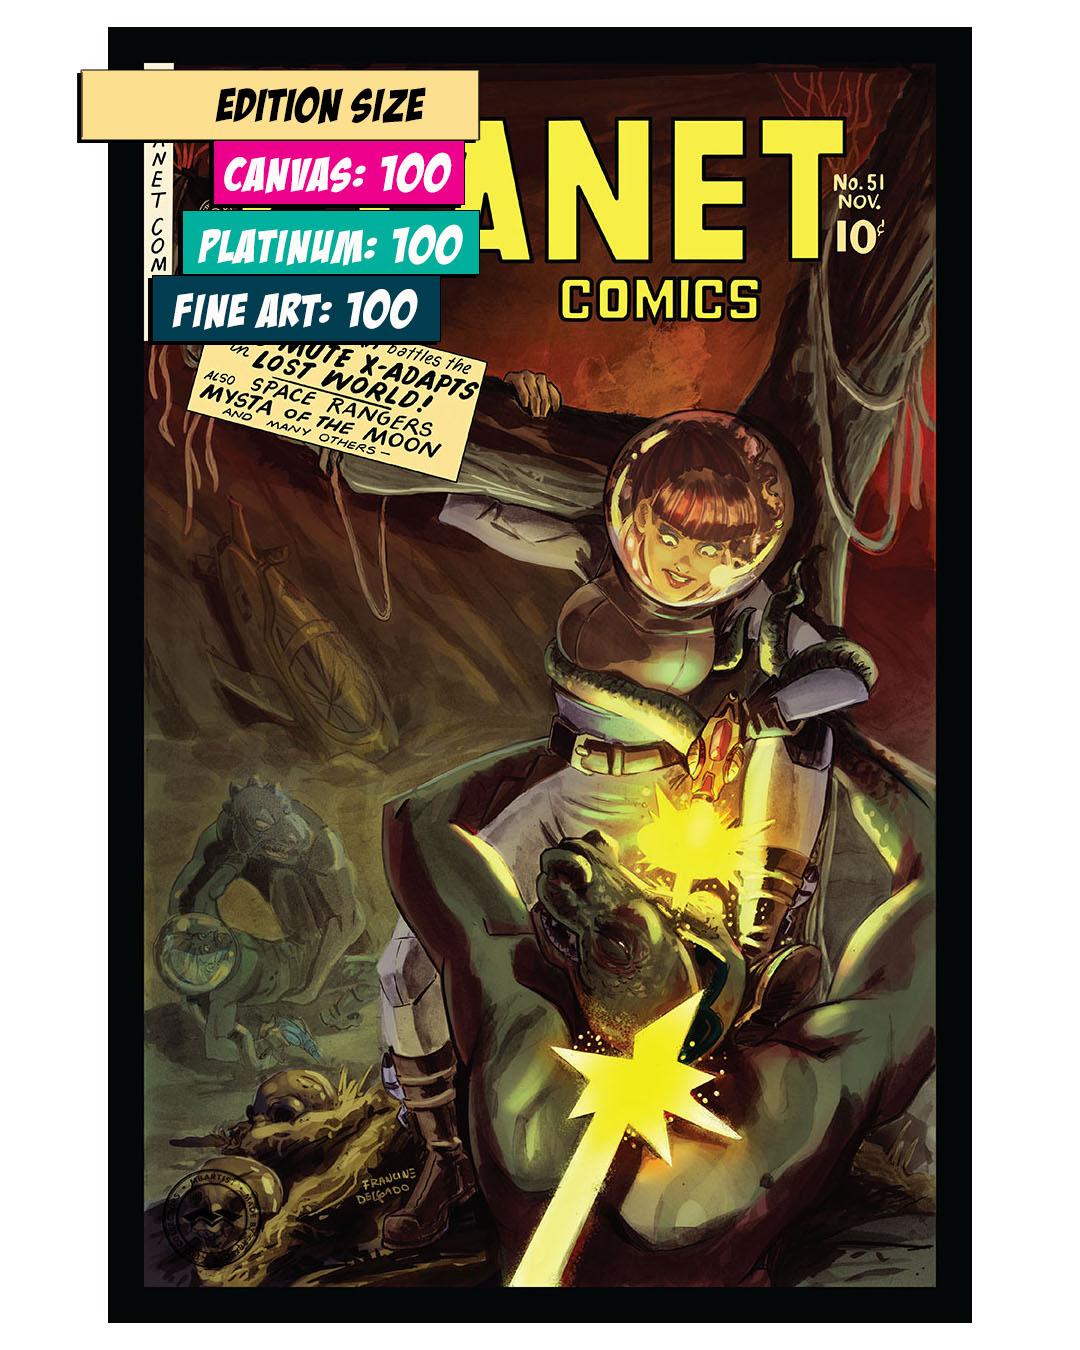 PLANET COMICS #51: FROM DAMSEL TO DOMINANT